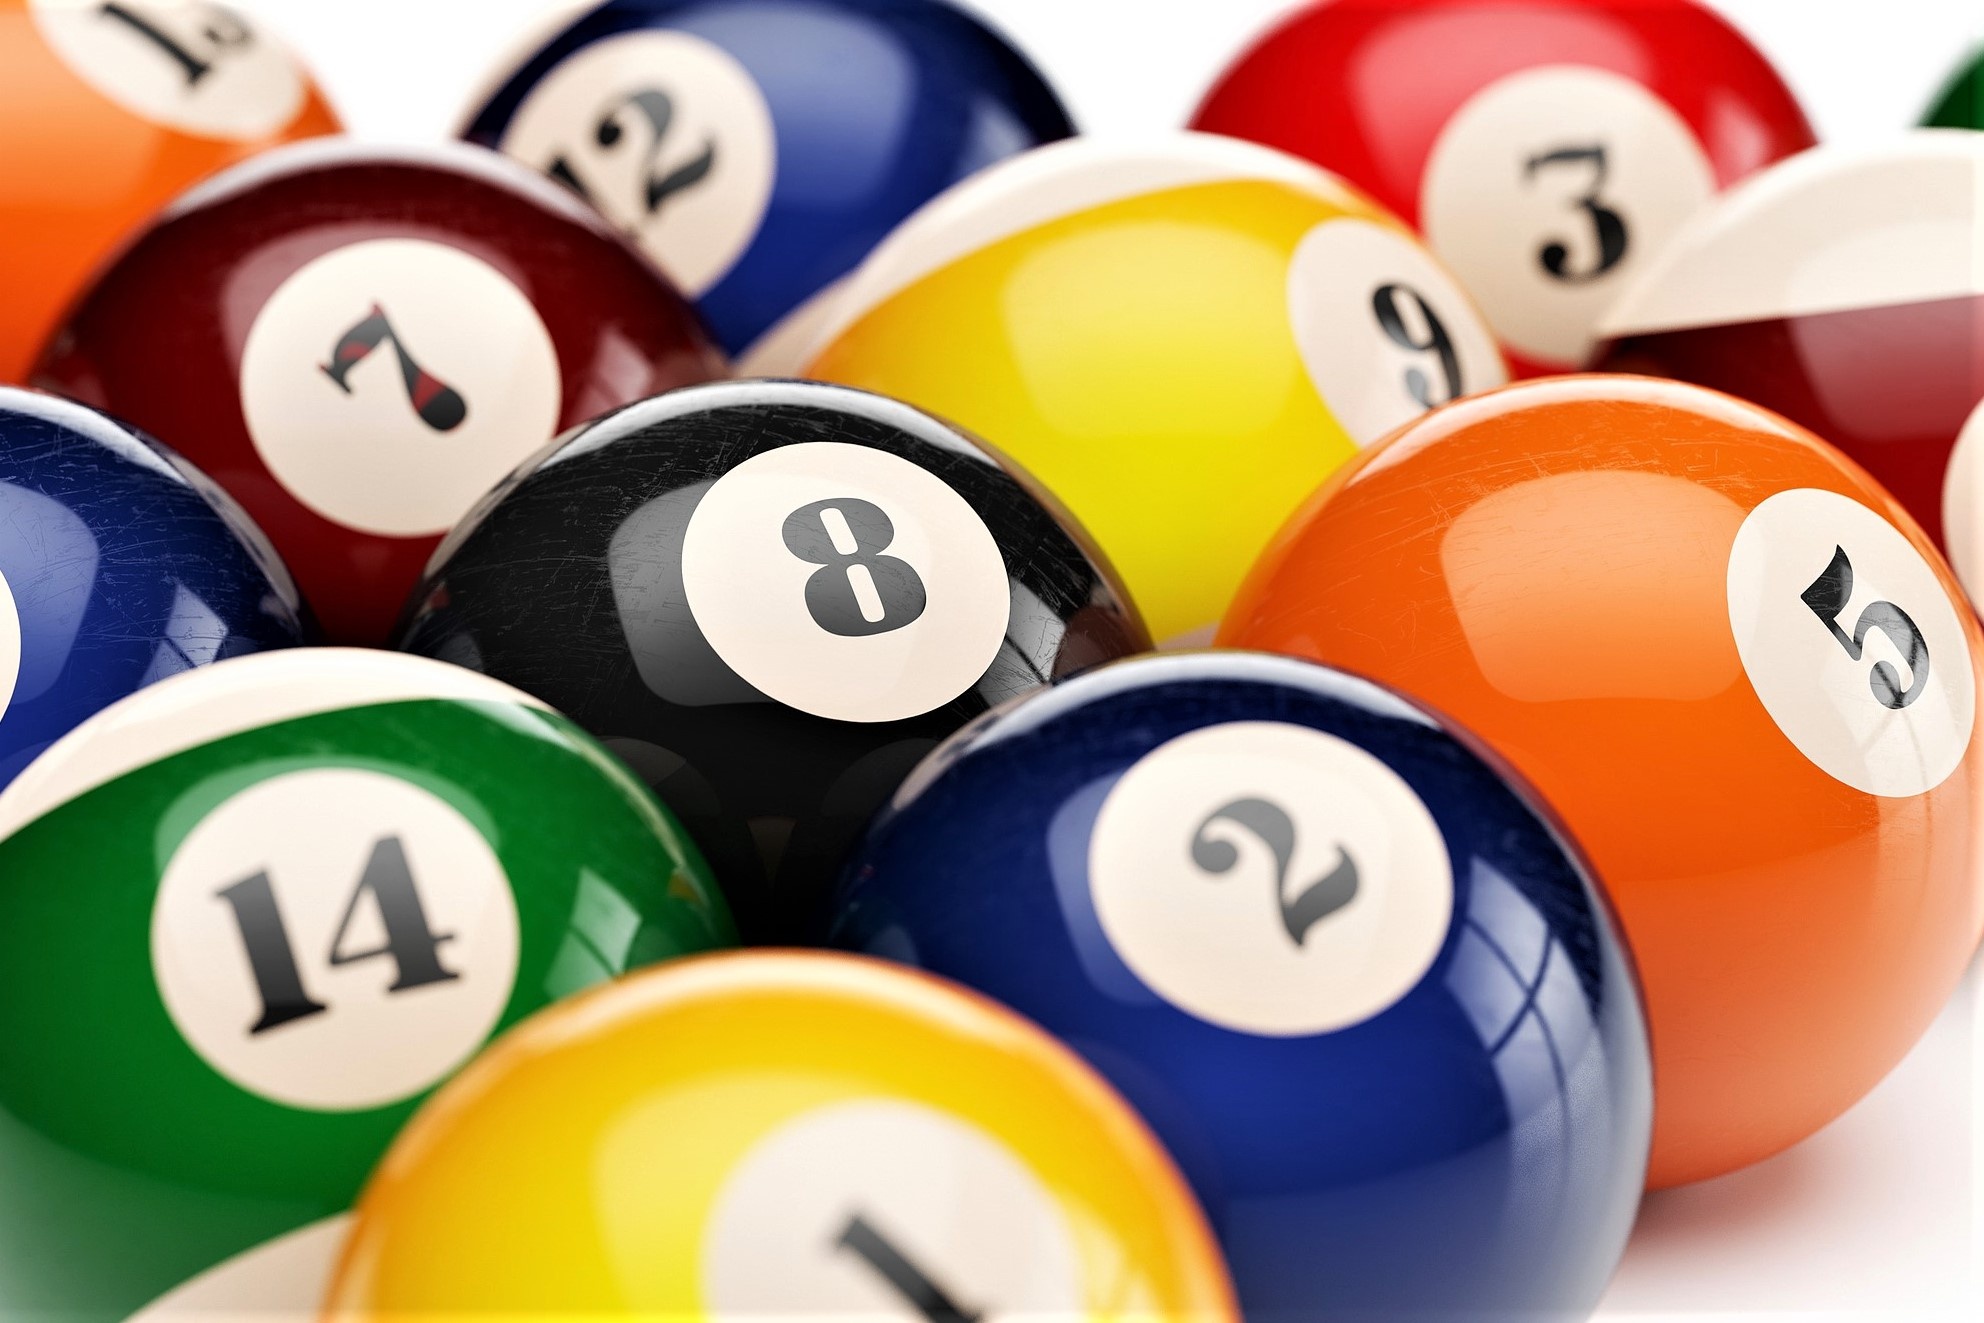 Billiards: Indoor games and sports, Classic eight-ball, Seven solid-colored balls, seven striped balls, and the black 8 ball. 1990x1330 HD Background.